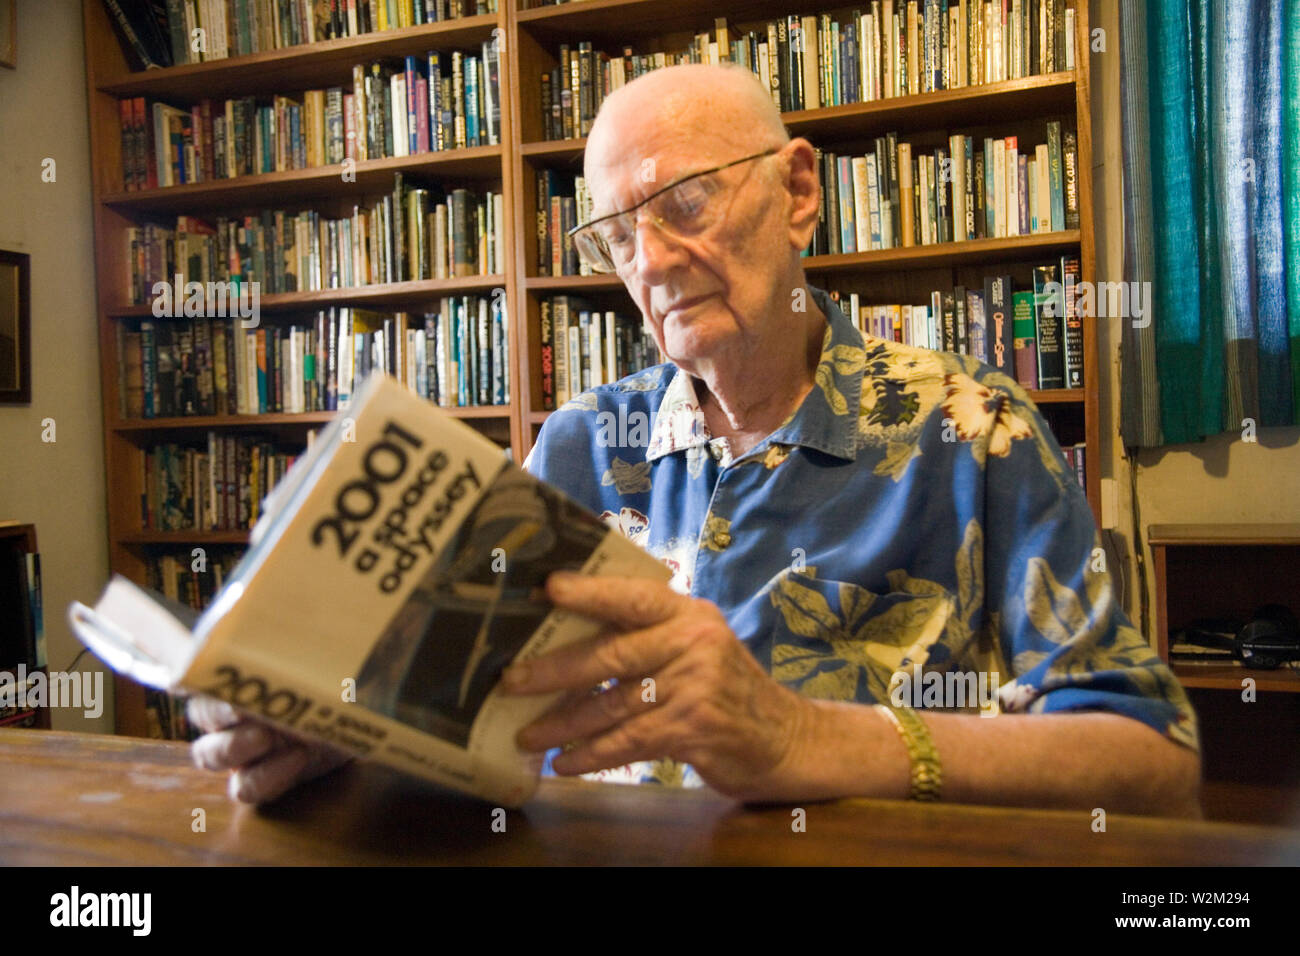 Sir Arthur C. Clarke, 1917 – 2008, the British science fiction writer,  inventor and futurist, most famous for his novel, 2001: A Space Odyssey.  Clarke lived in Sri Lanka from 1956 until